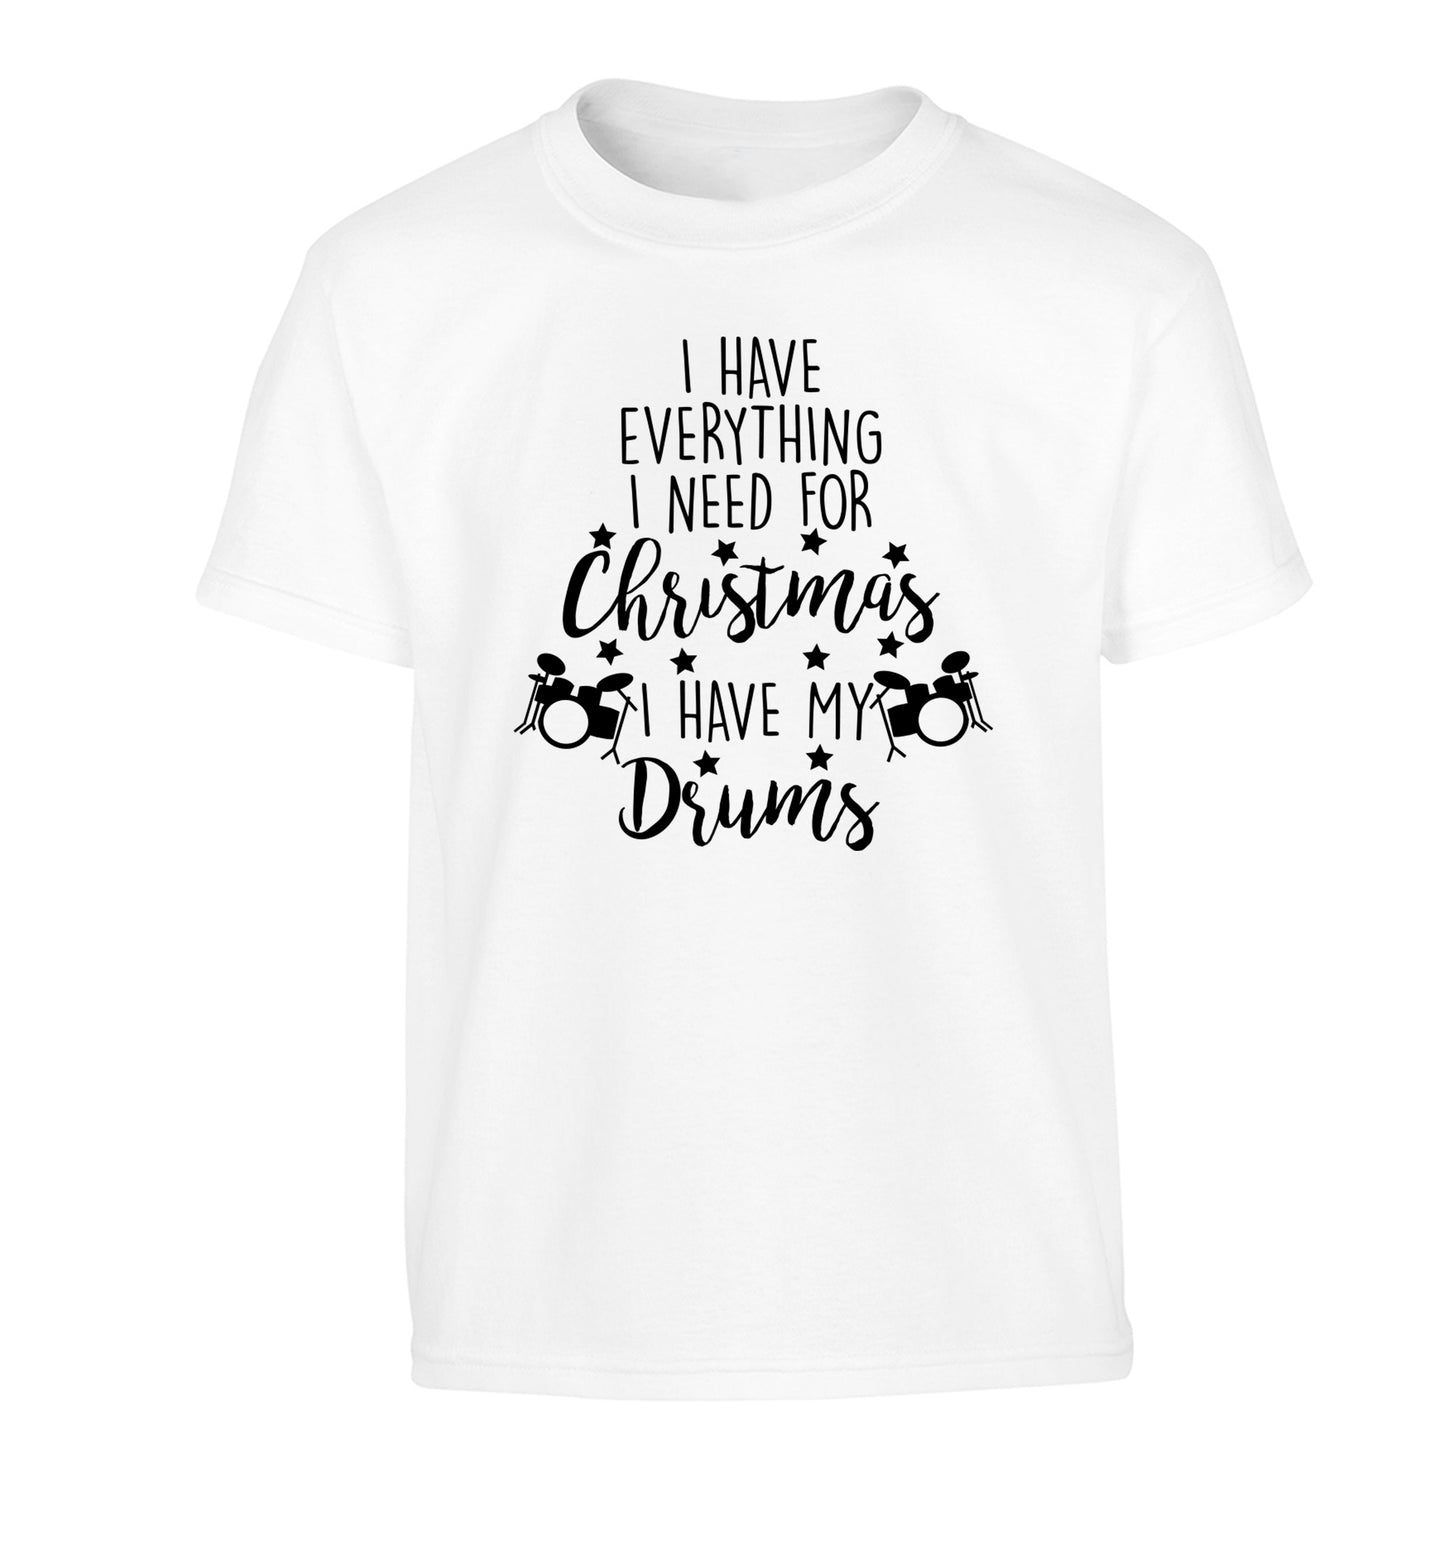 I have everything I need for Christmas I have my drums! Children's white Tshirt 12-14 Years